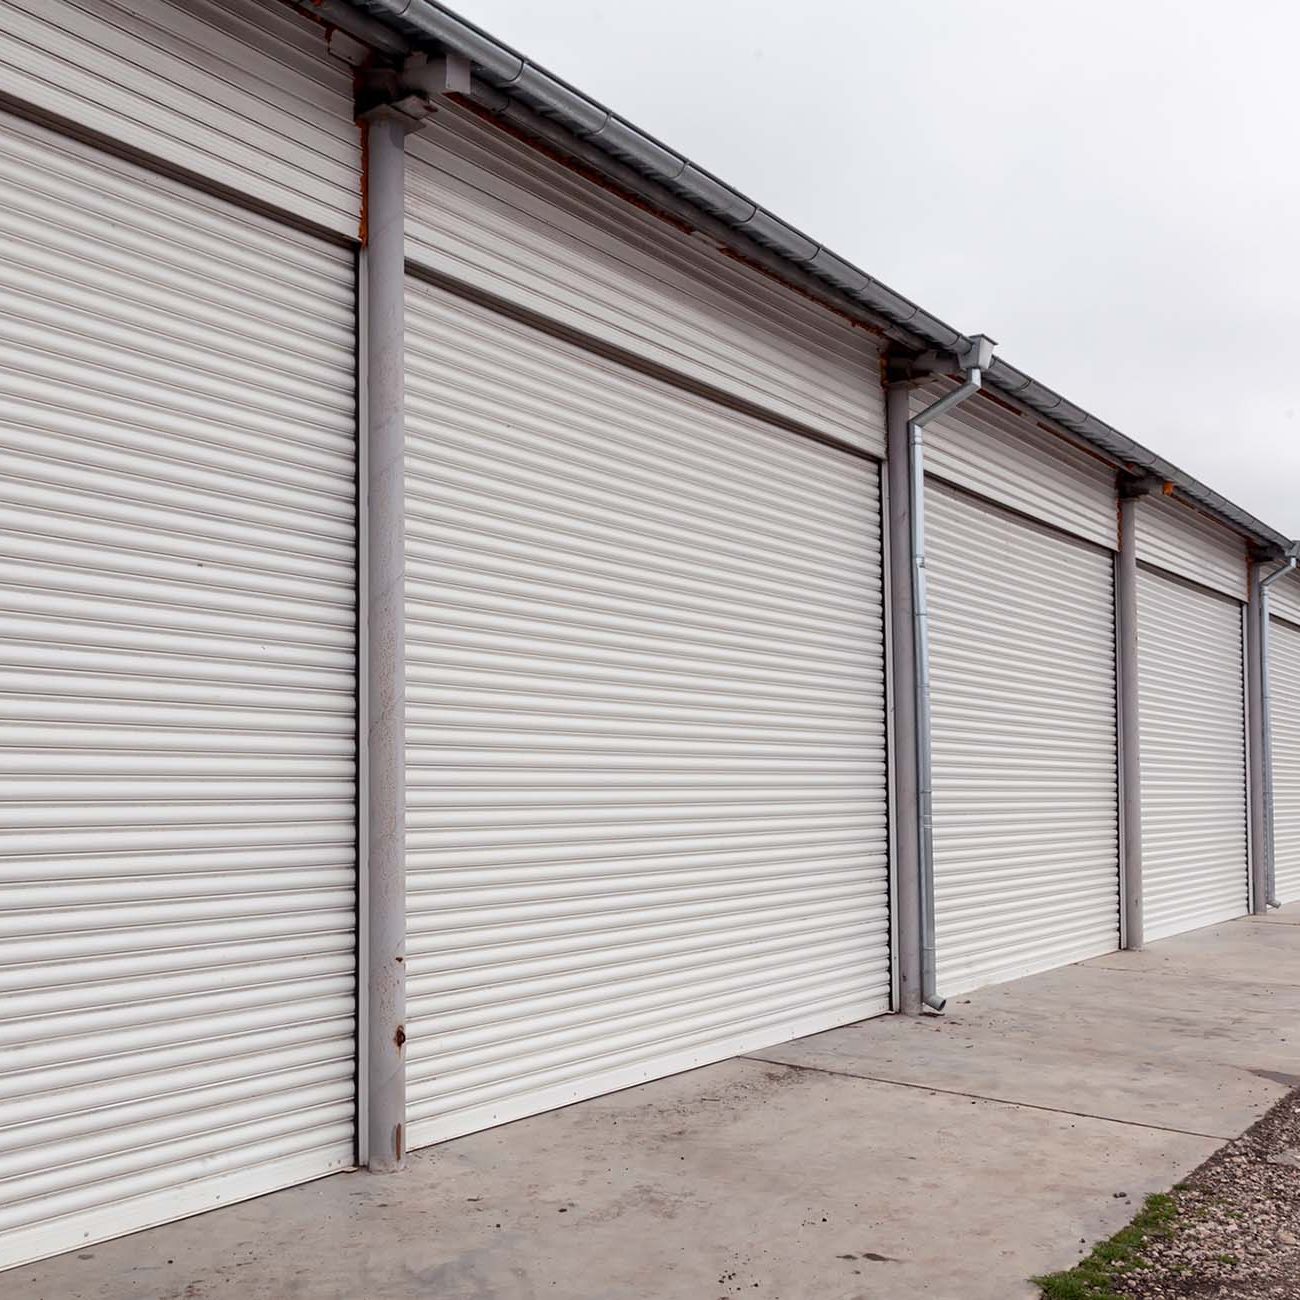 Windows protected with roller shutters, background texture.